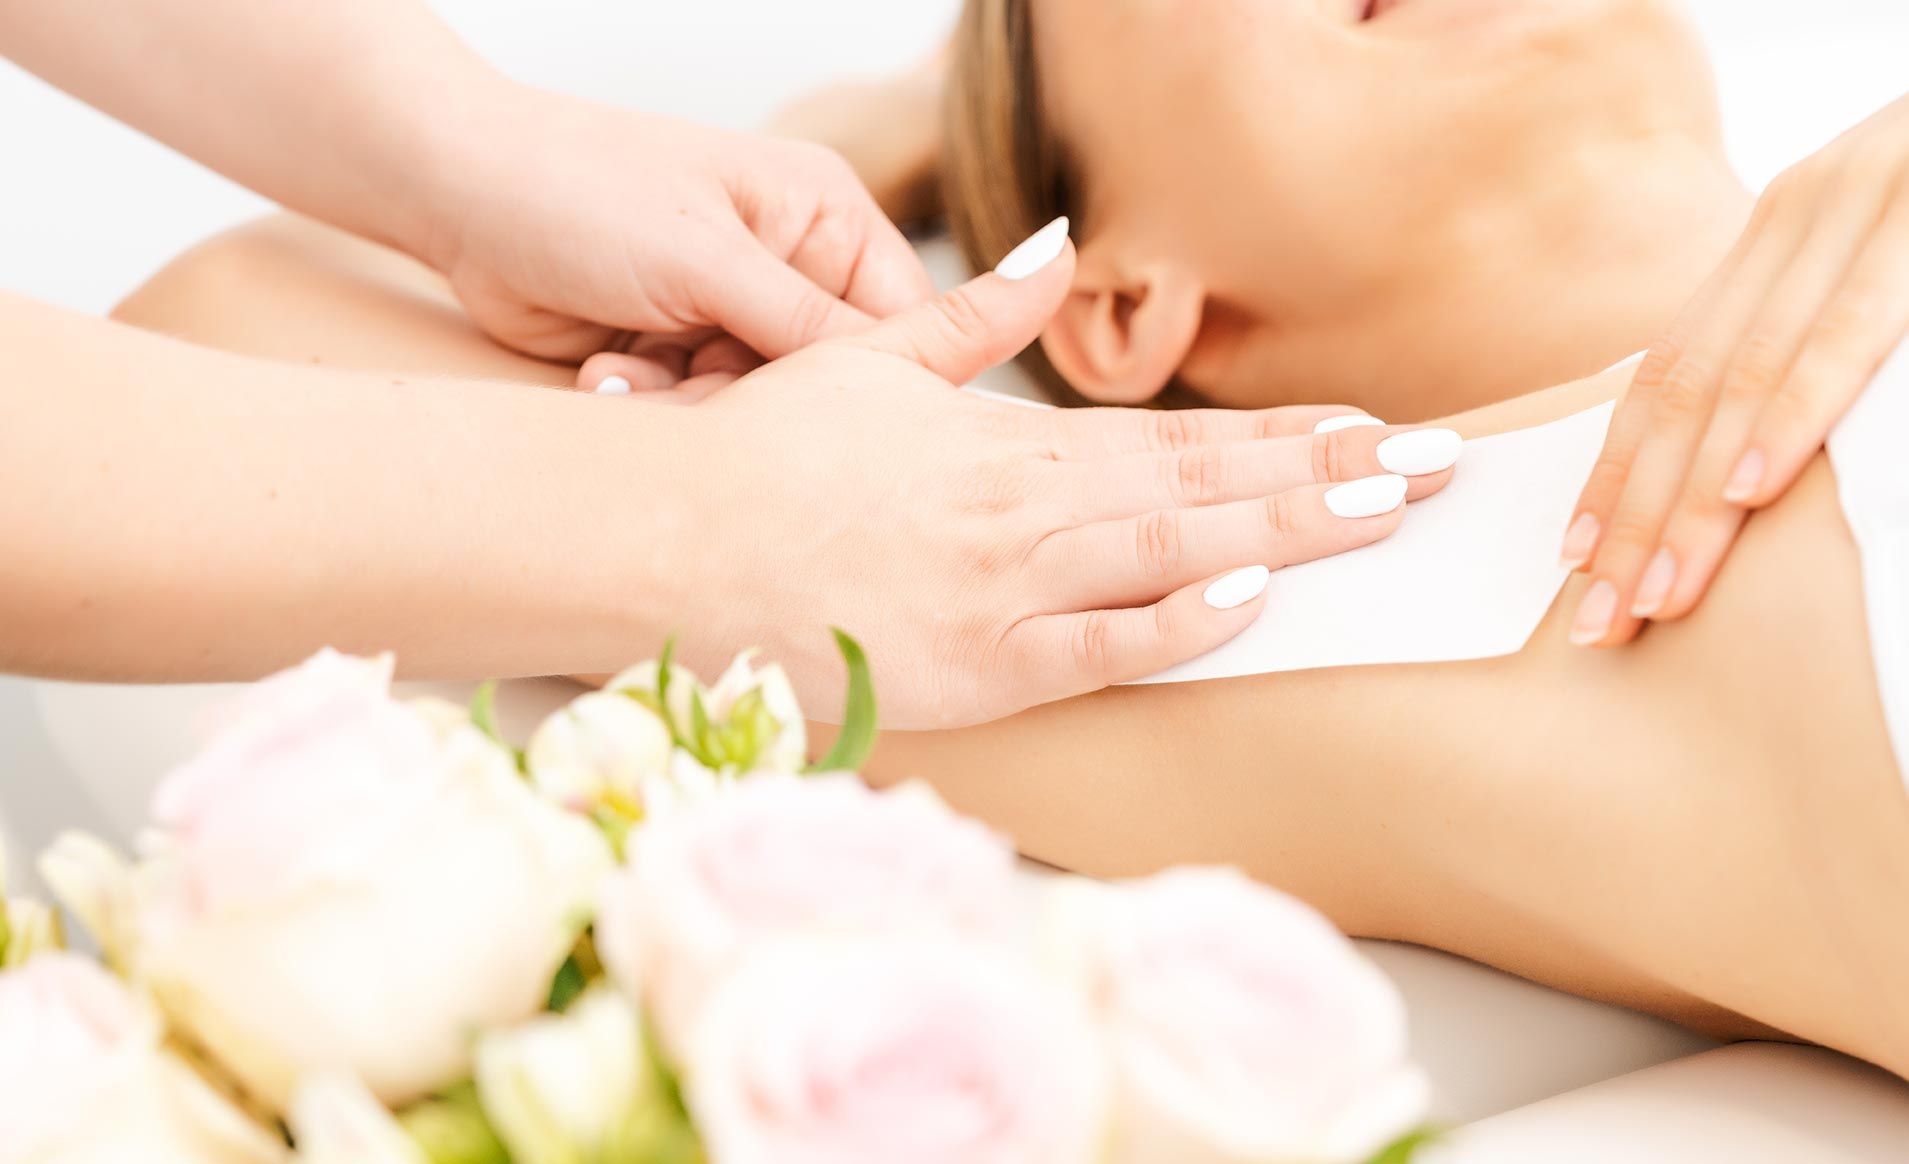 Aristocracy Salon & Day Spa offers hair removal & waxing services for under arms